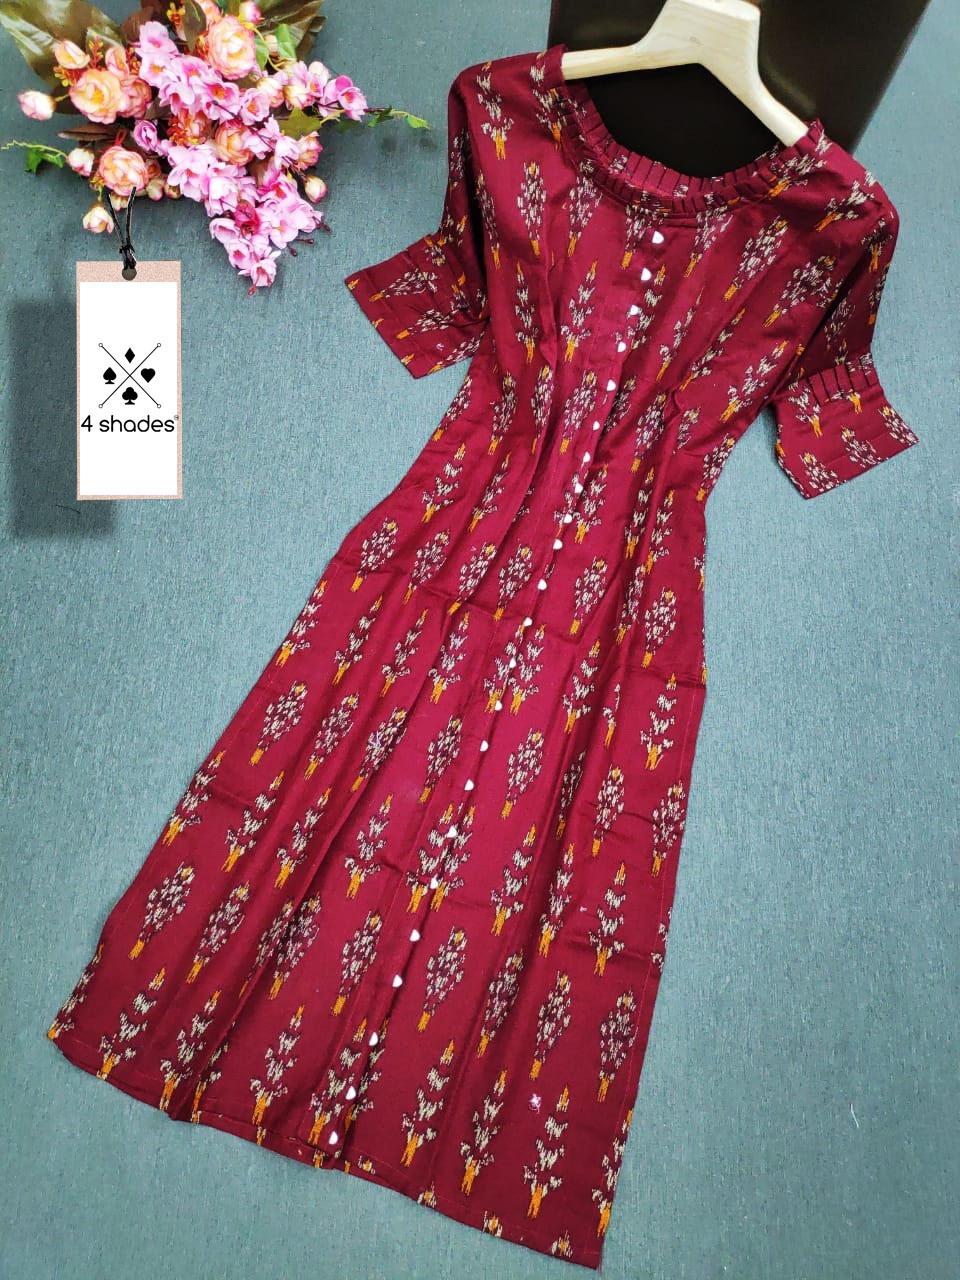 4shades cotton ikat printed daily wear kurties at affordable prices